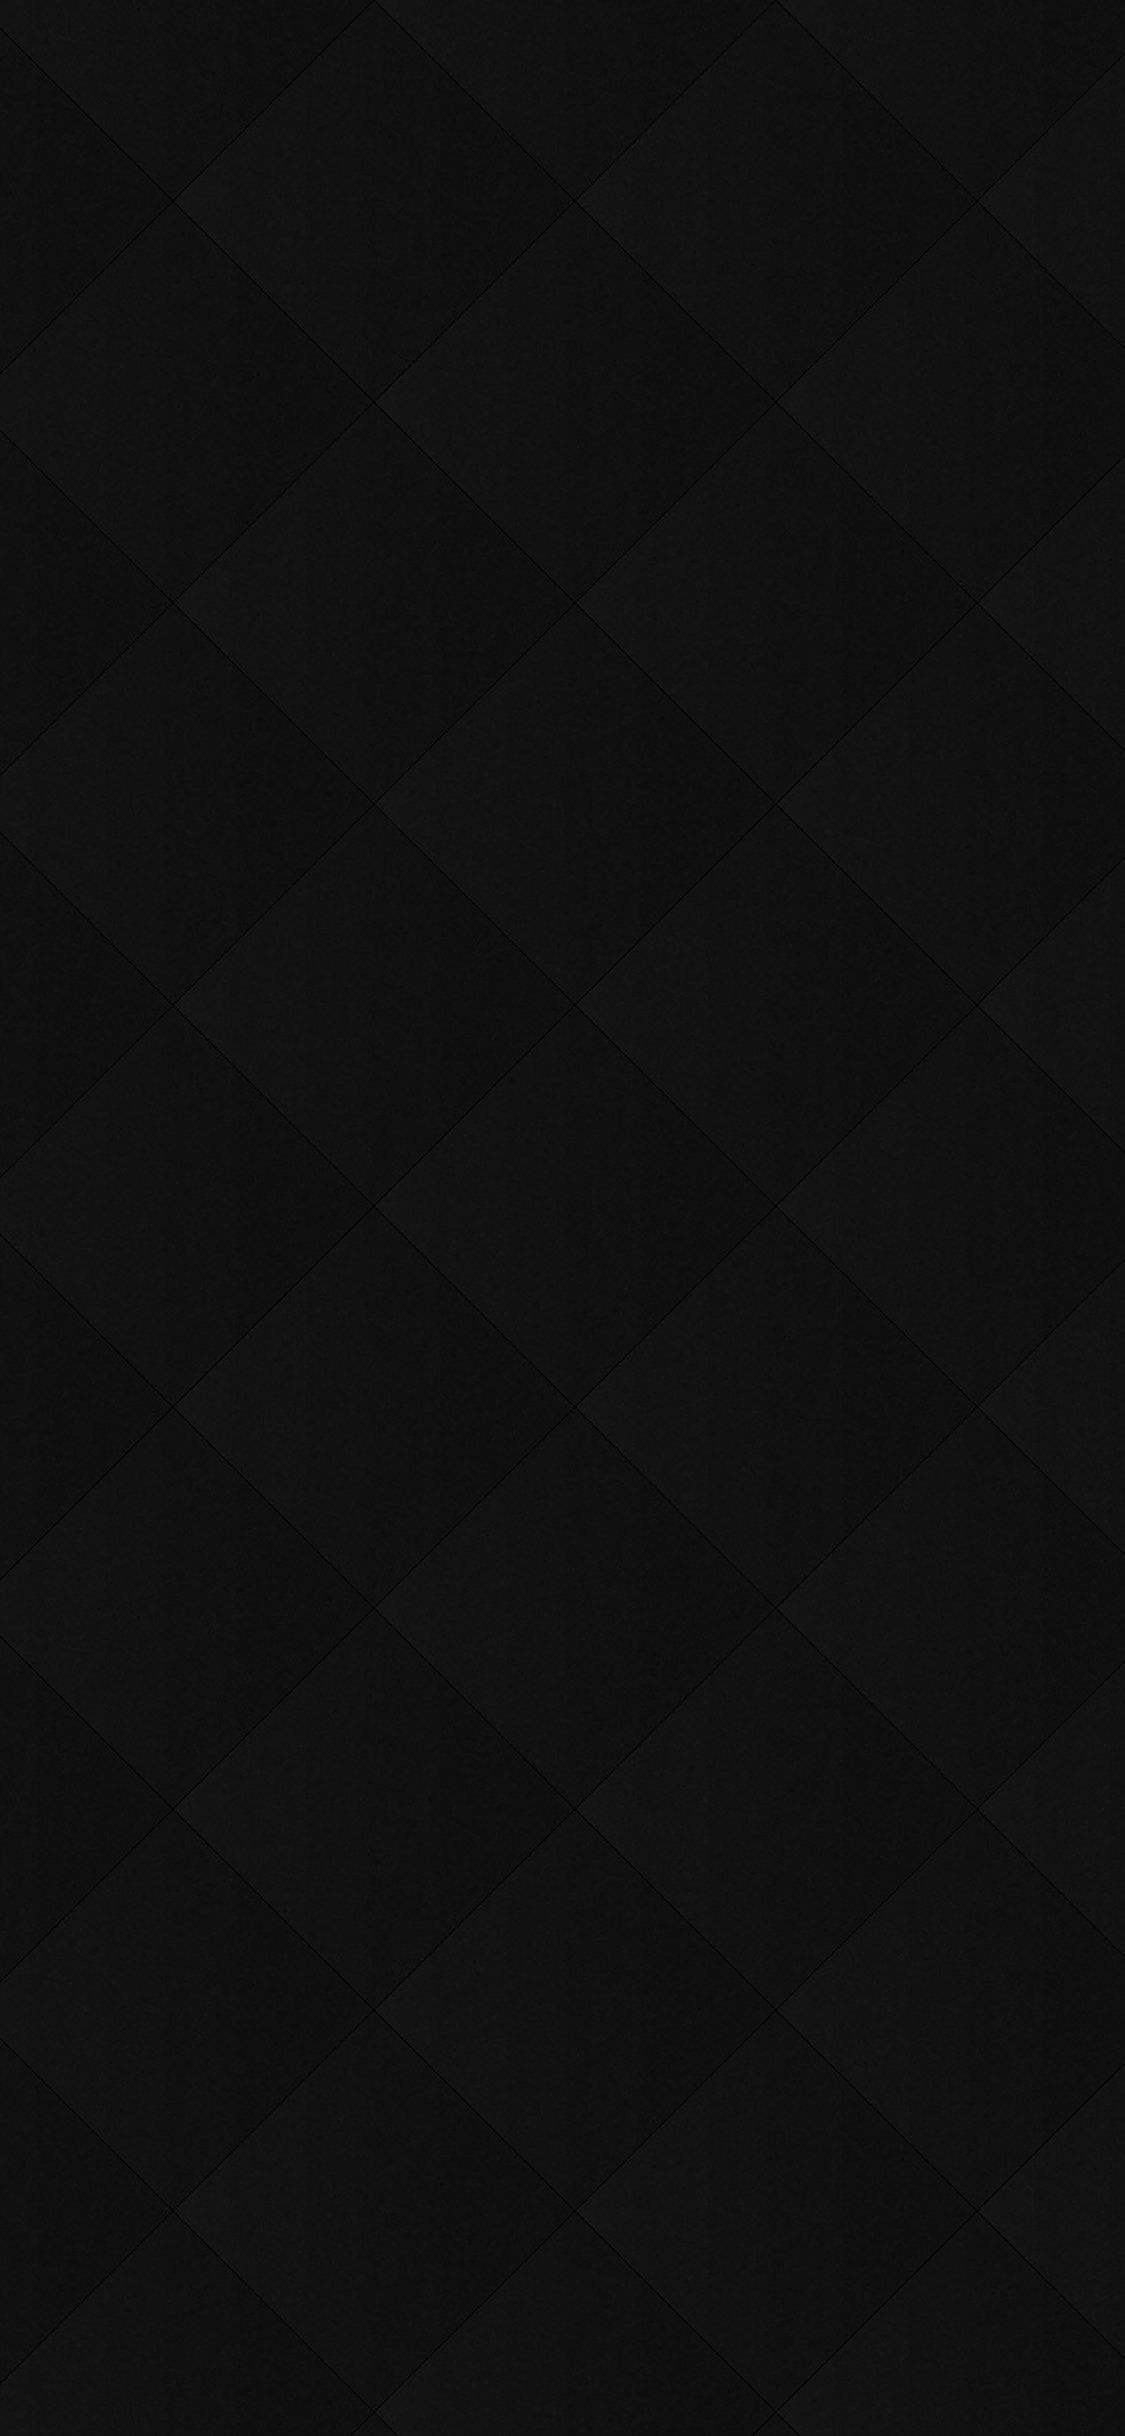 iPhone Black And White Squares Wallpaper